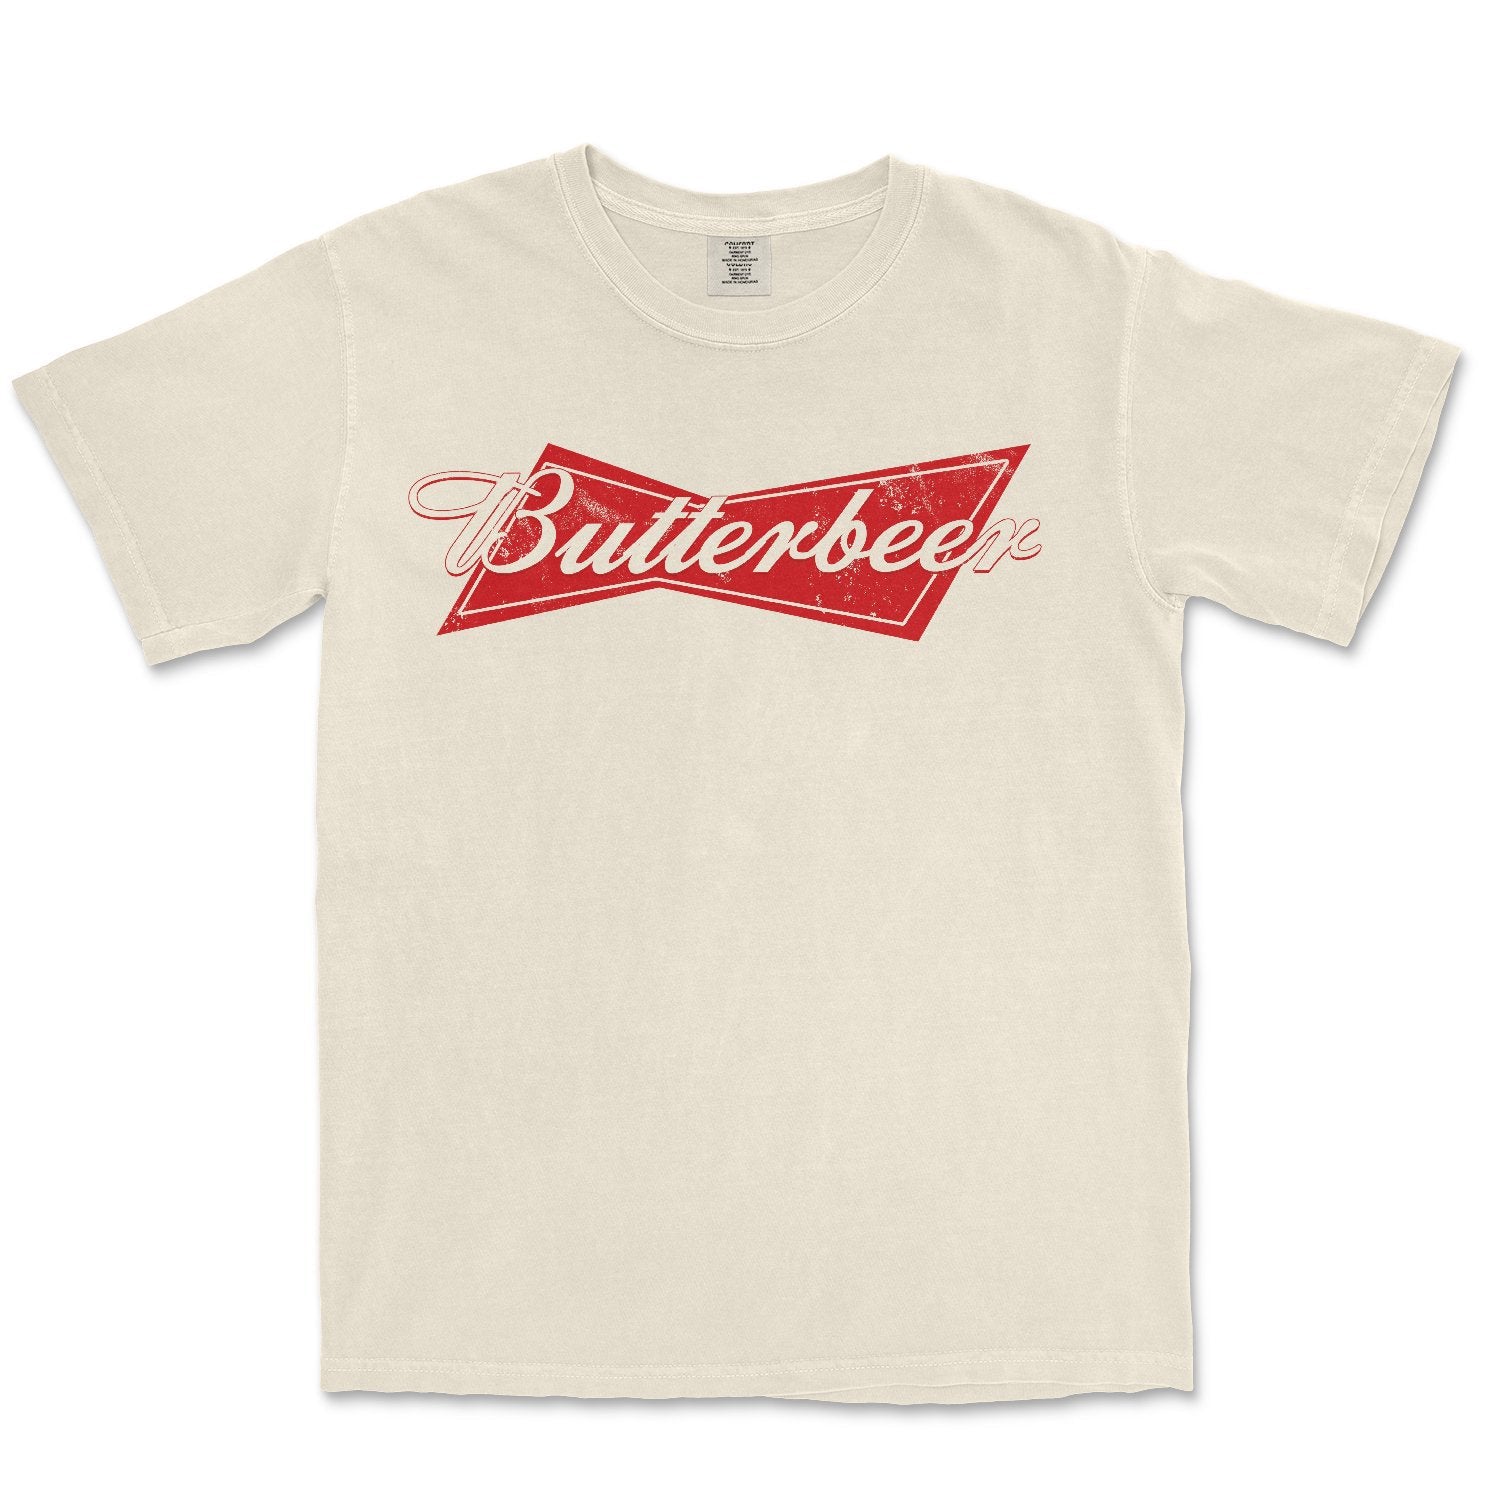 Butterbeer Garment Dyed Tee